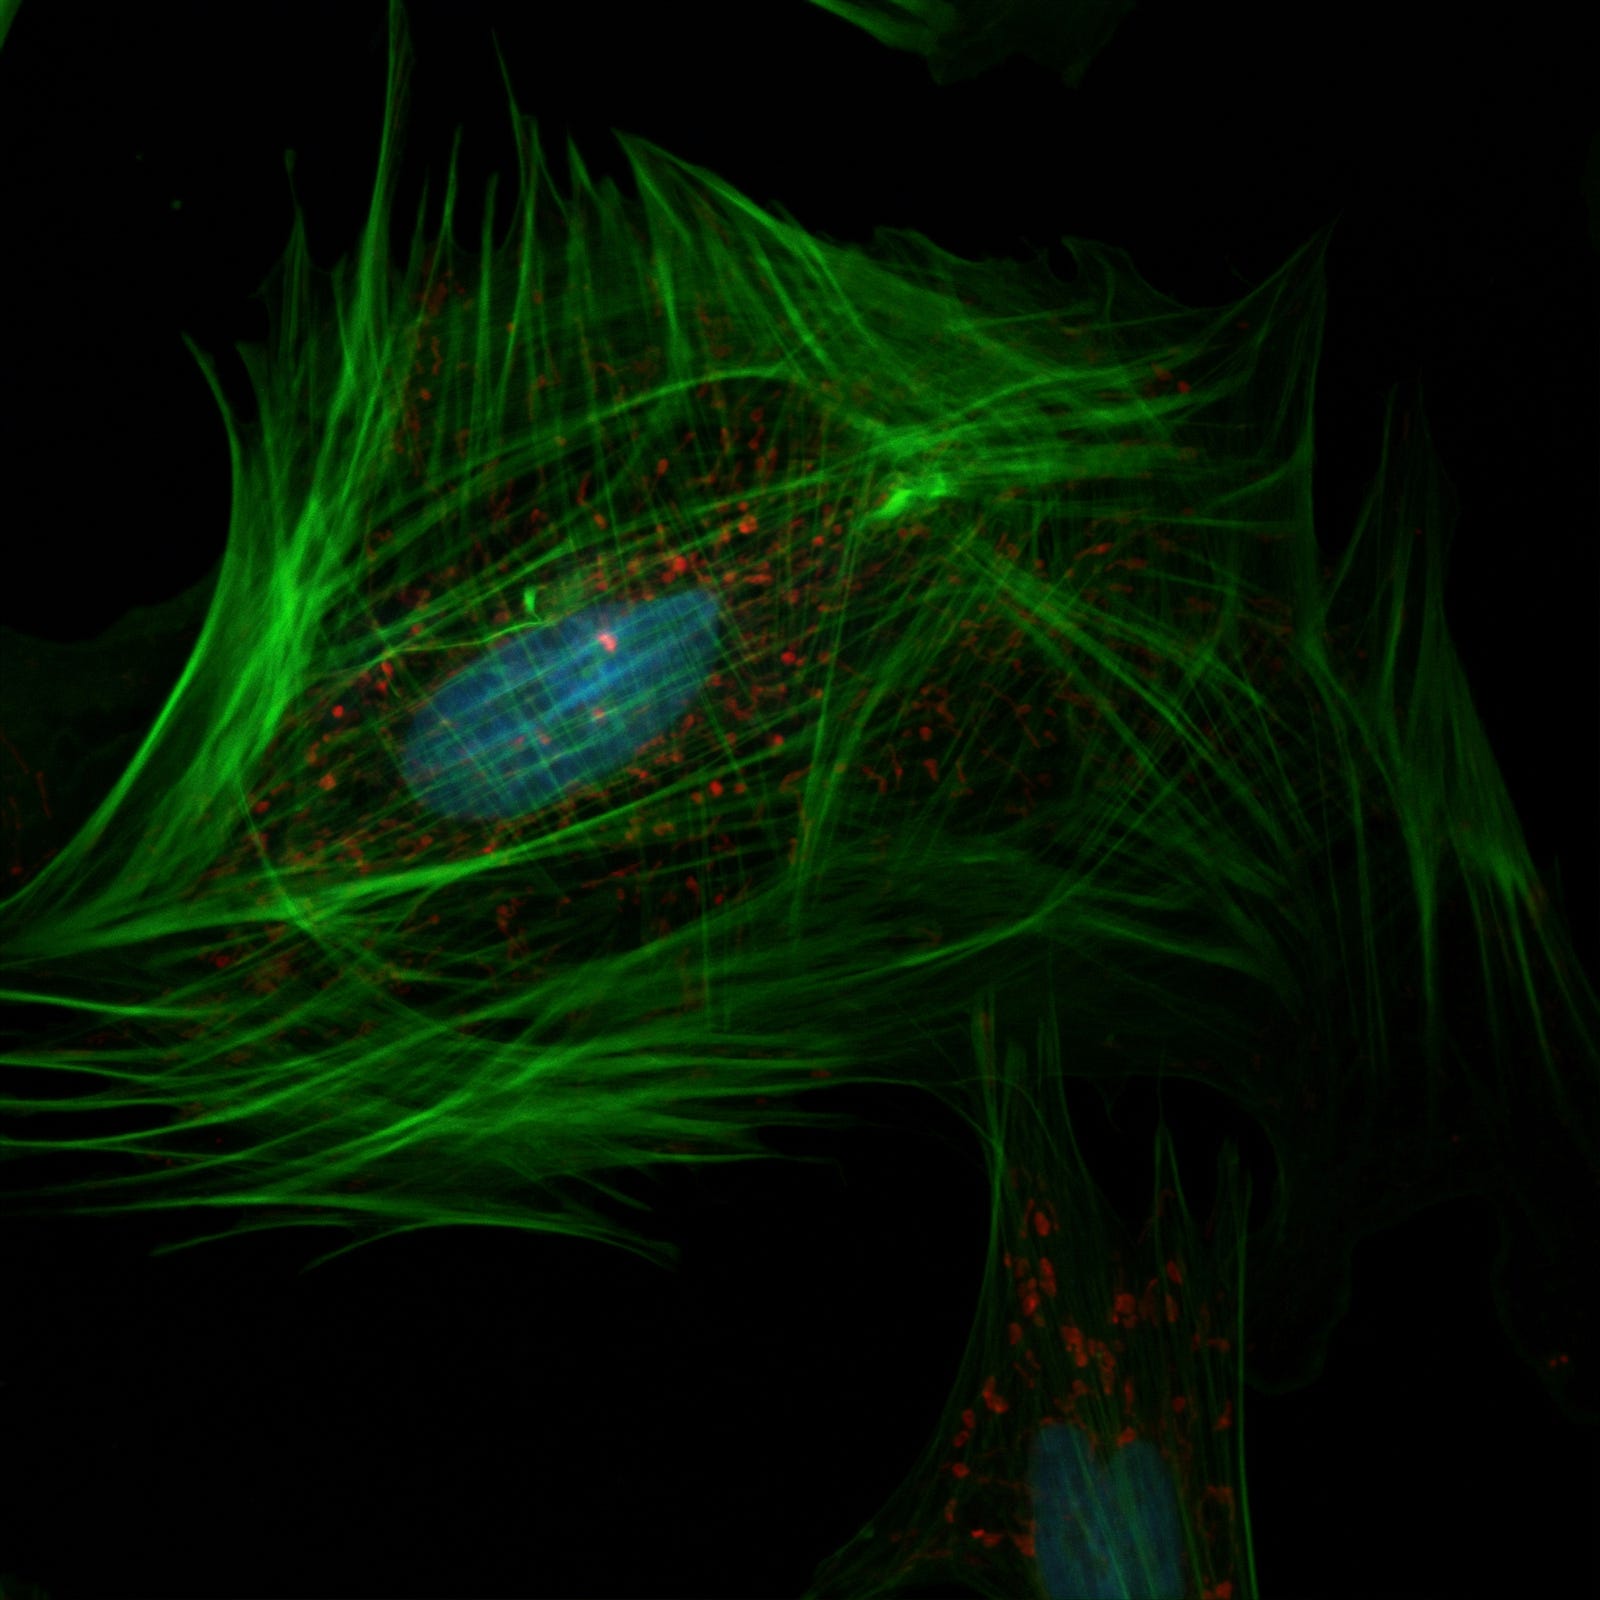 Cells, depicted in fluorescent green.